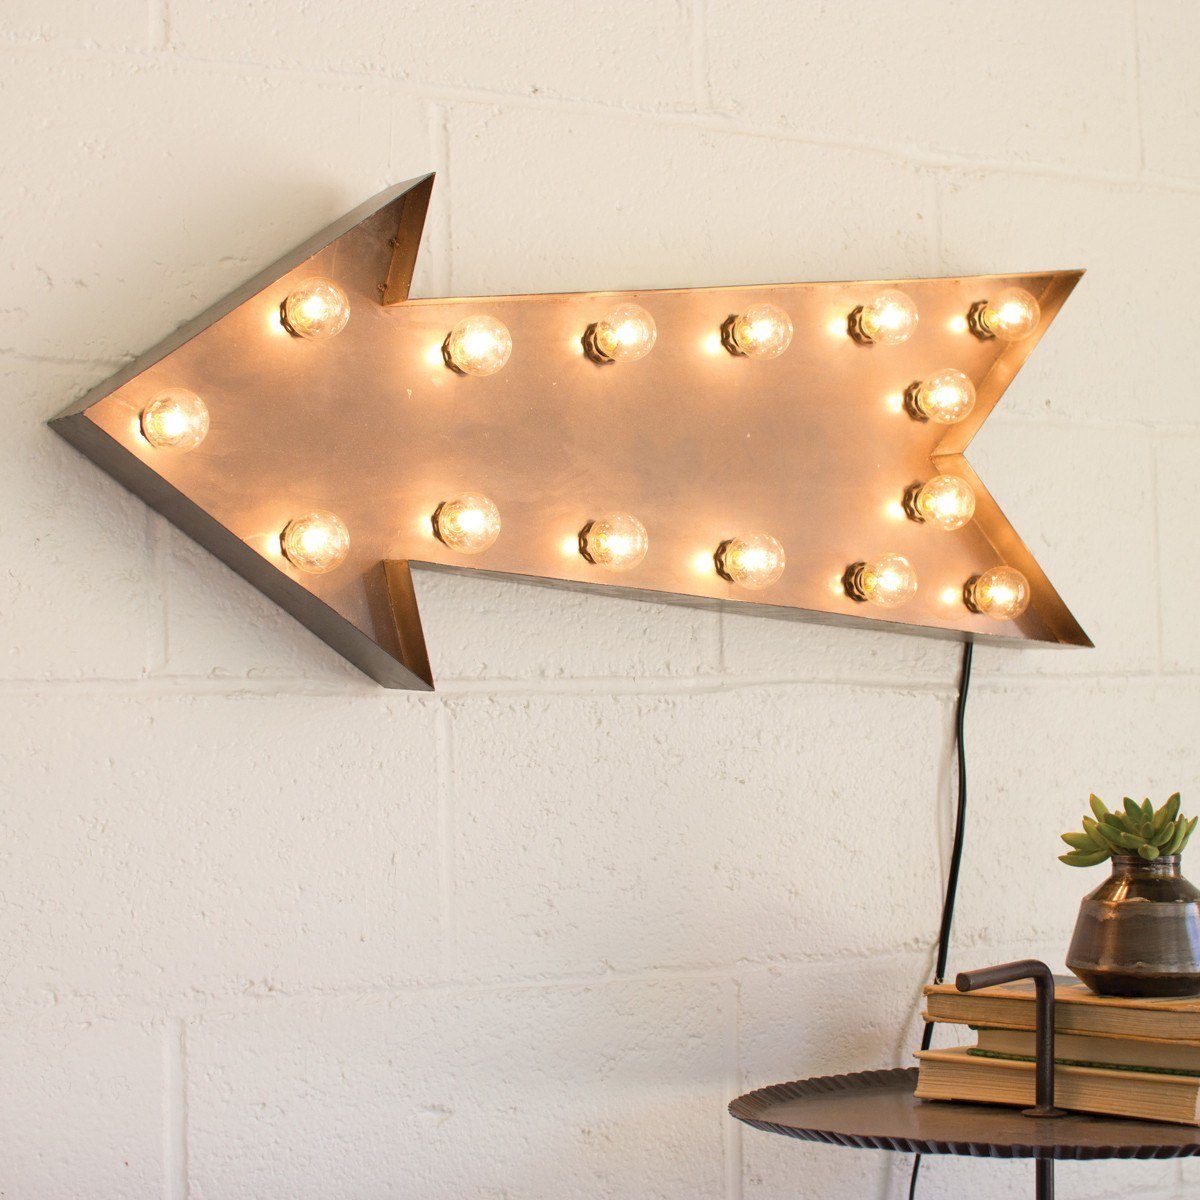 36” Large Arrow Sign Online Marquee Rusty - - Buy (Rustic) The Lights Marquee with Vintage Lights Marquee